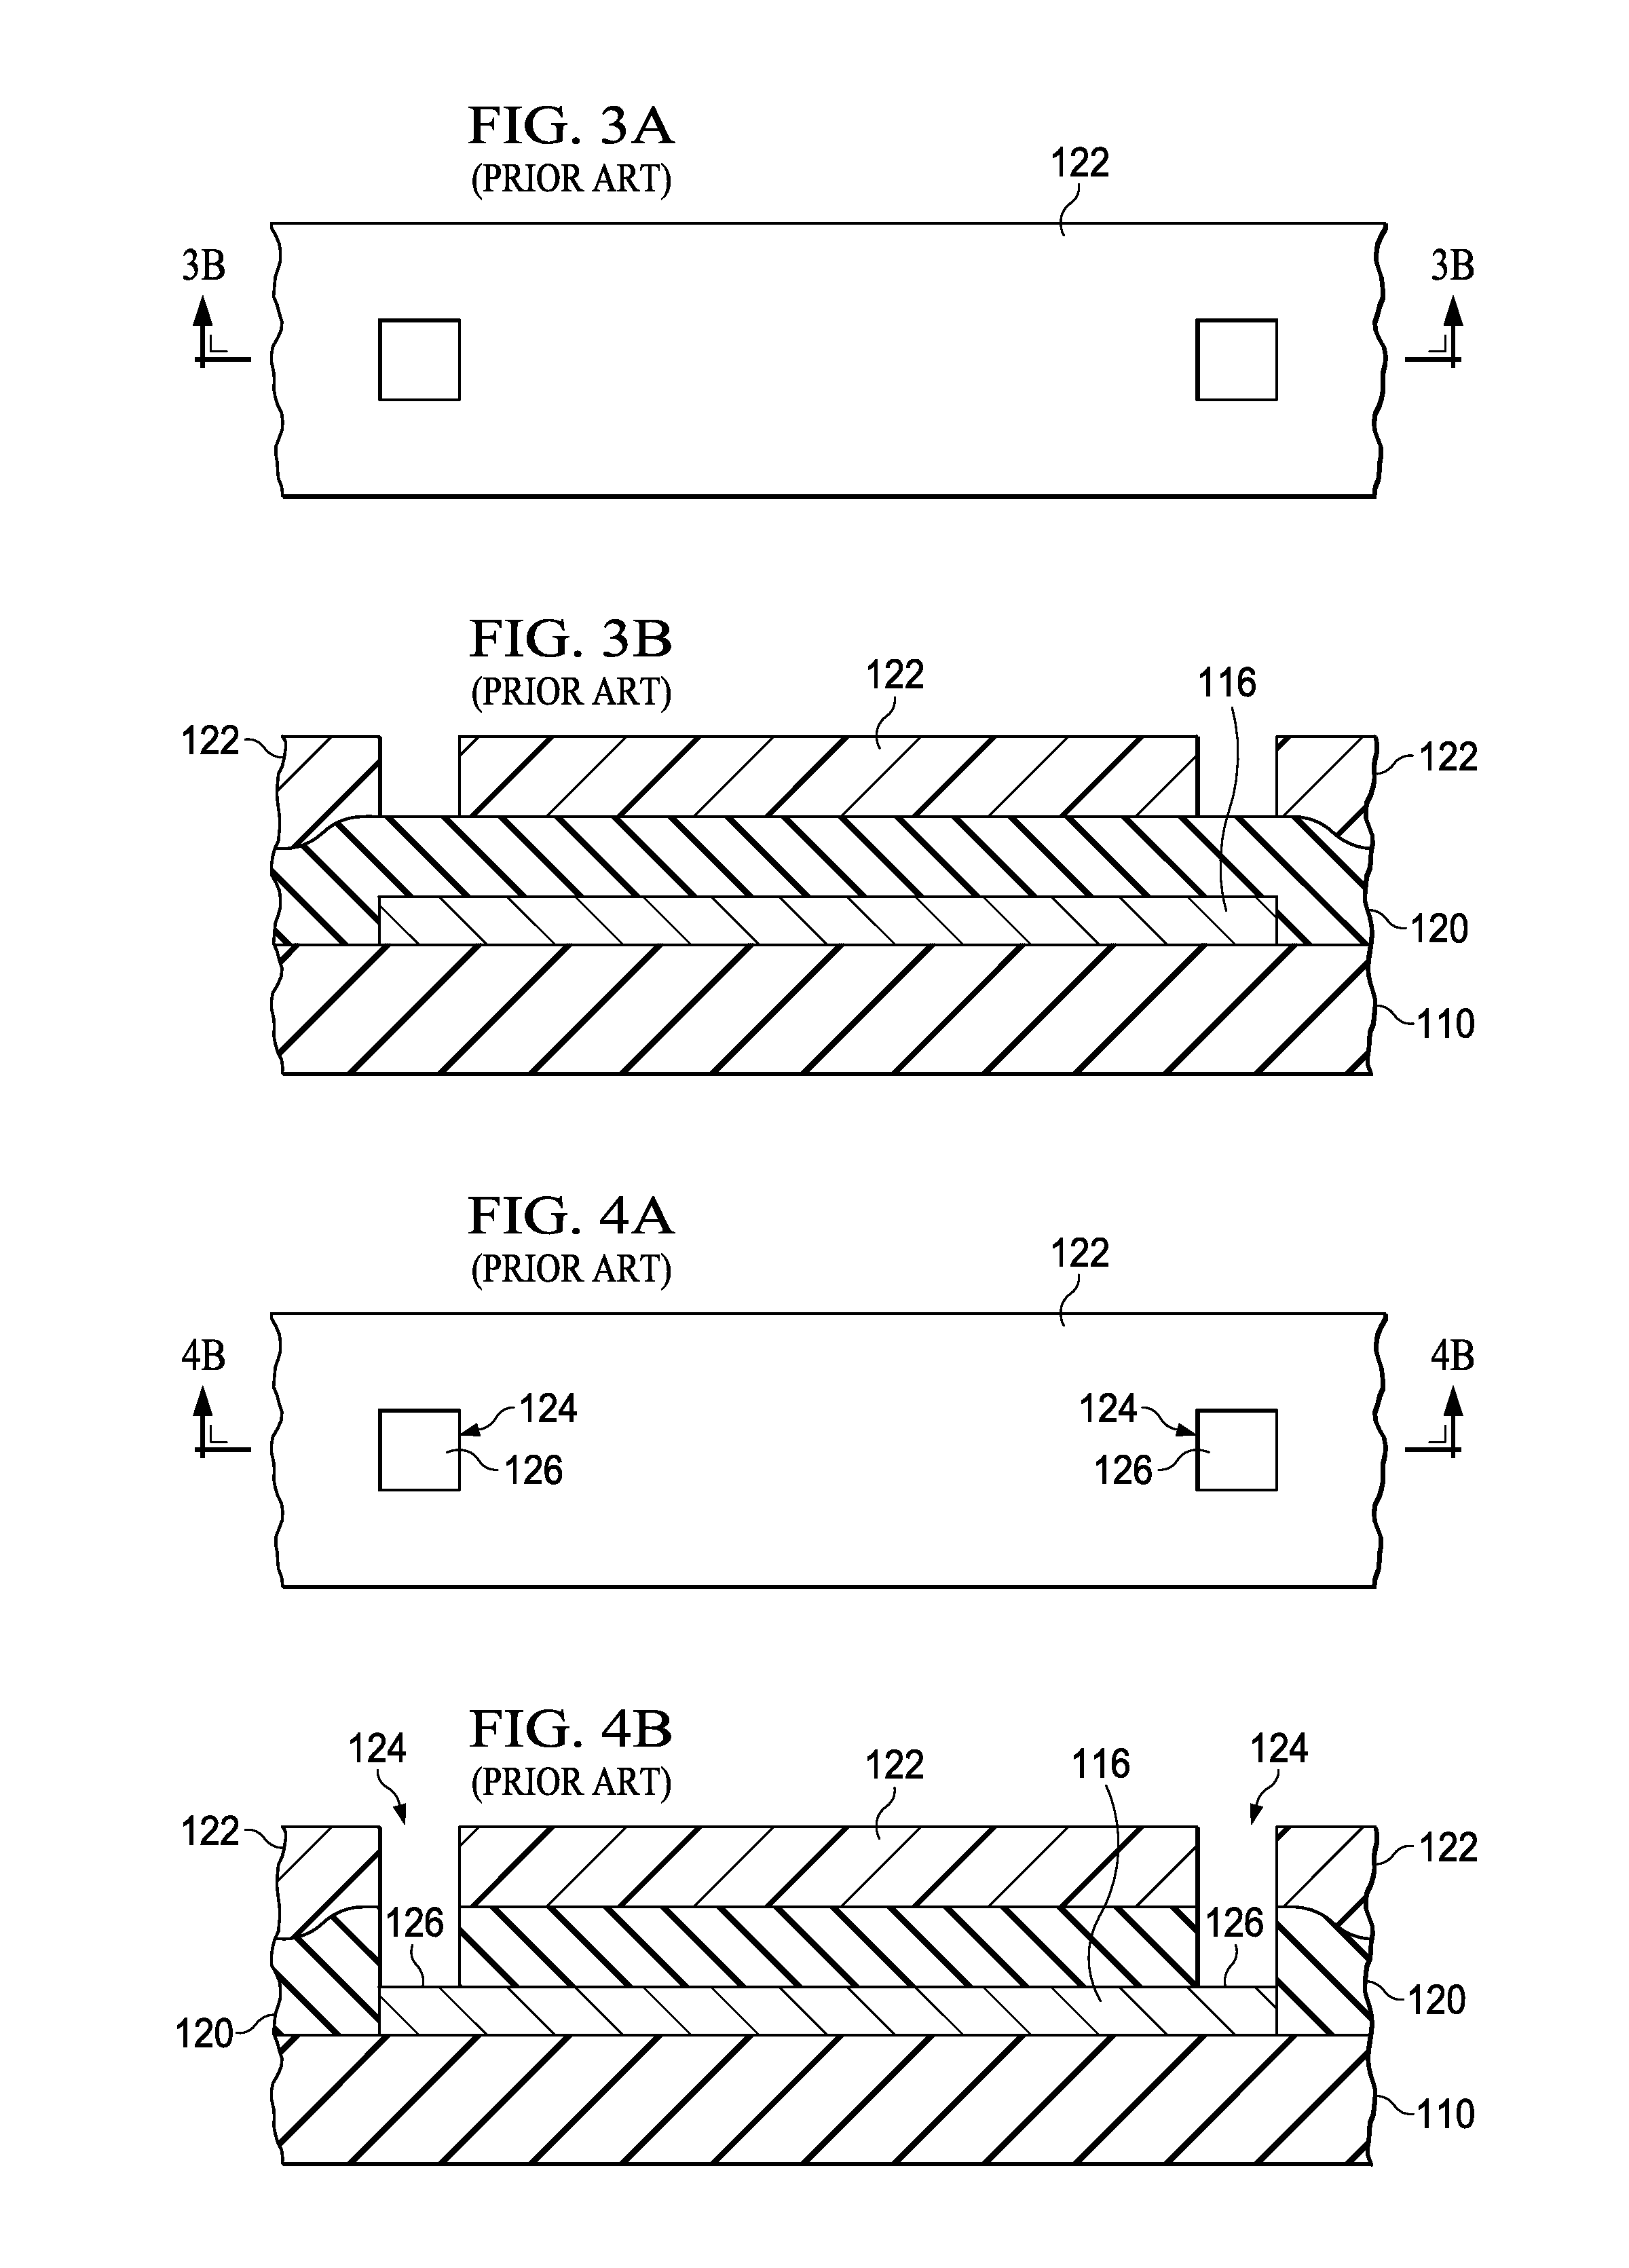 High-resistance thin-film resistor and method of forming the resistor